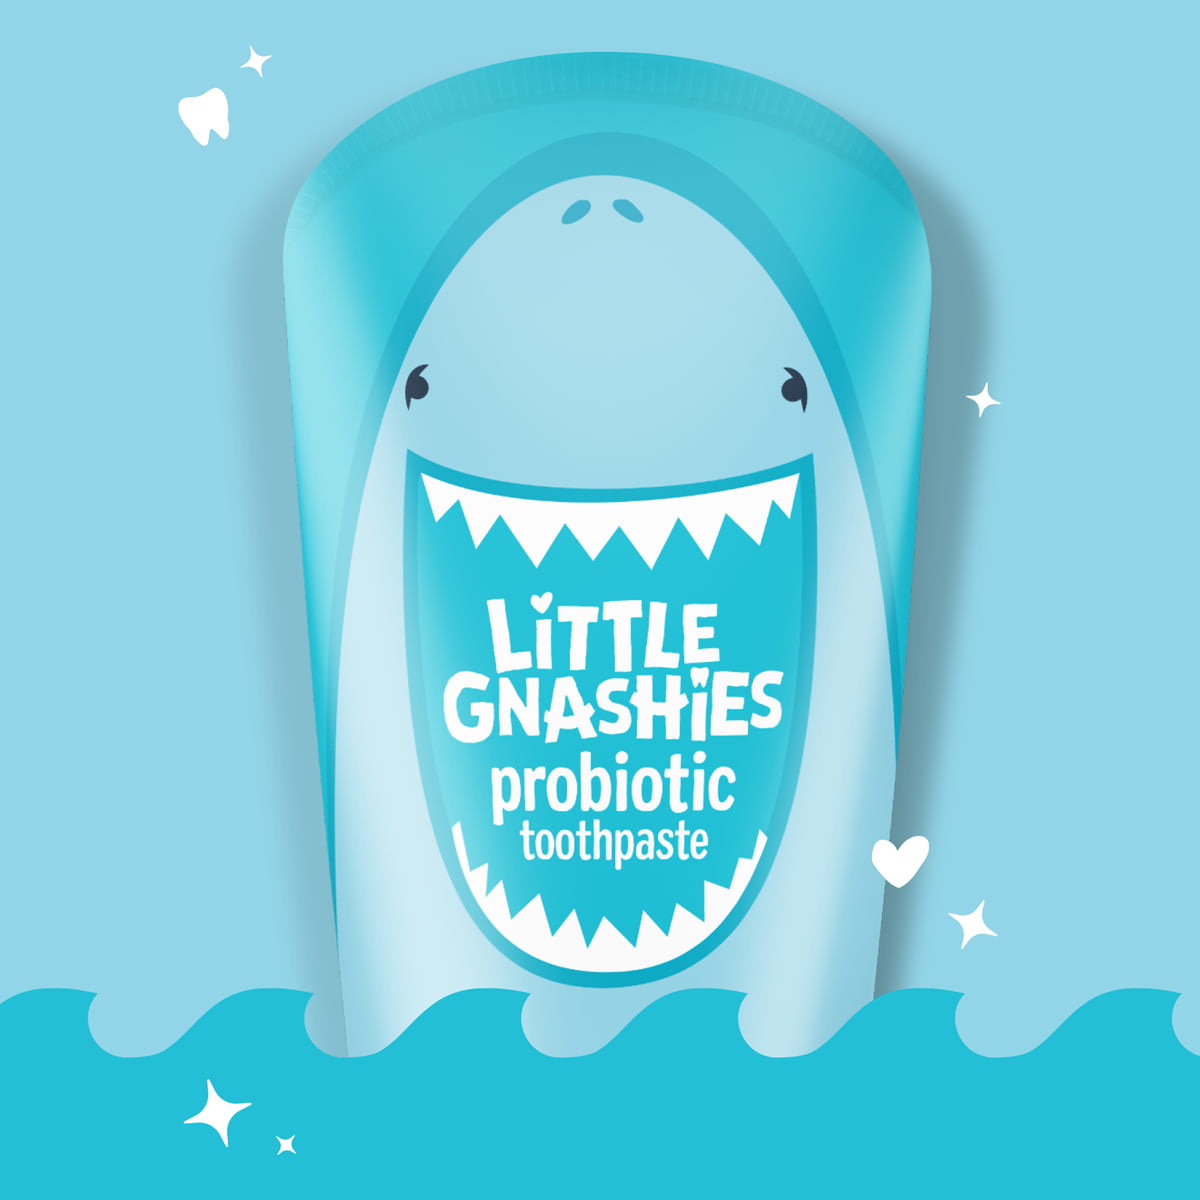 tooth-paste-packaging-redesign-childrens-range-shark-smile-happy-probiotic-bold-colour